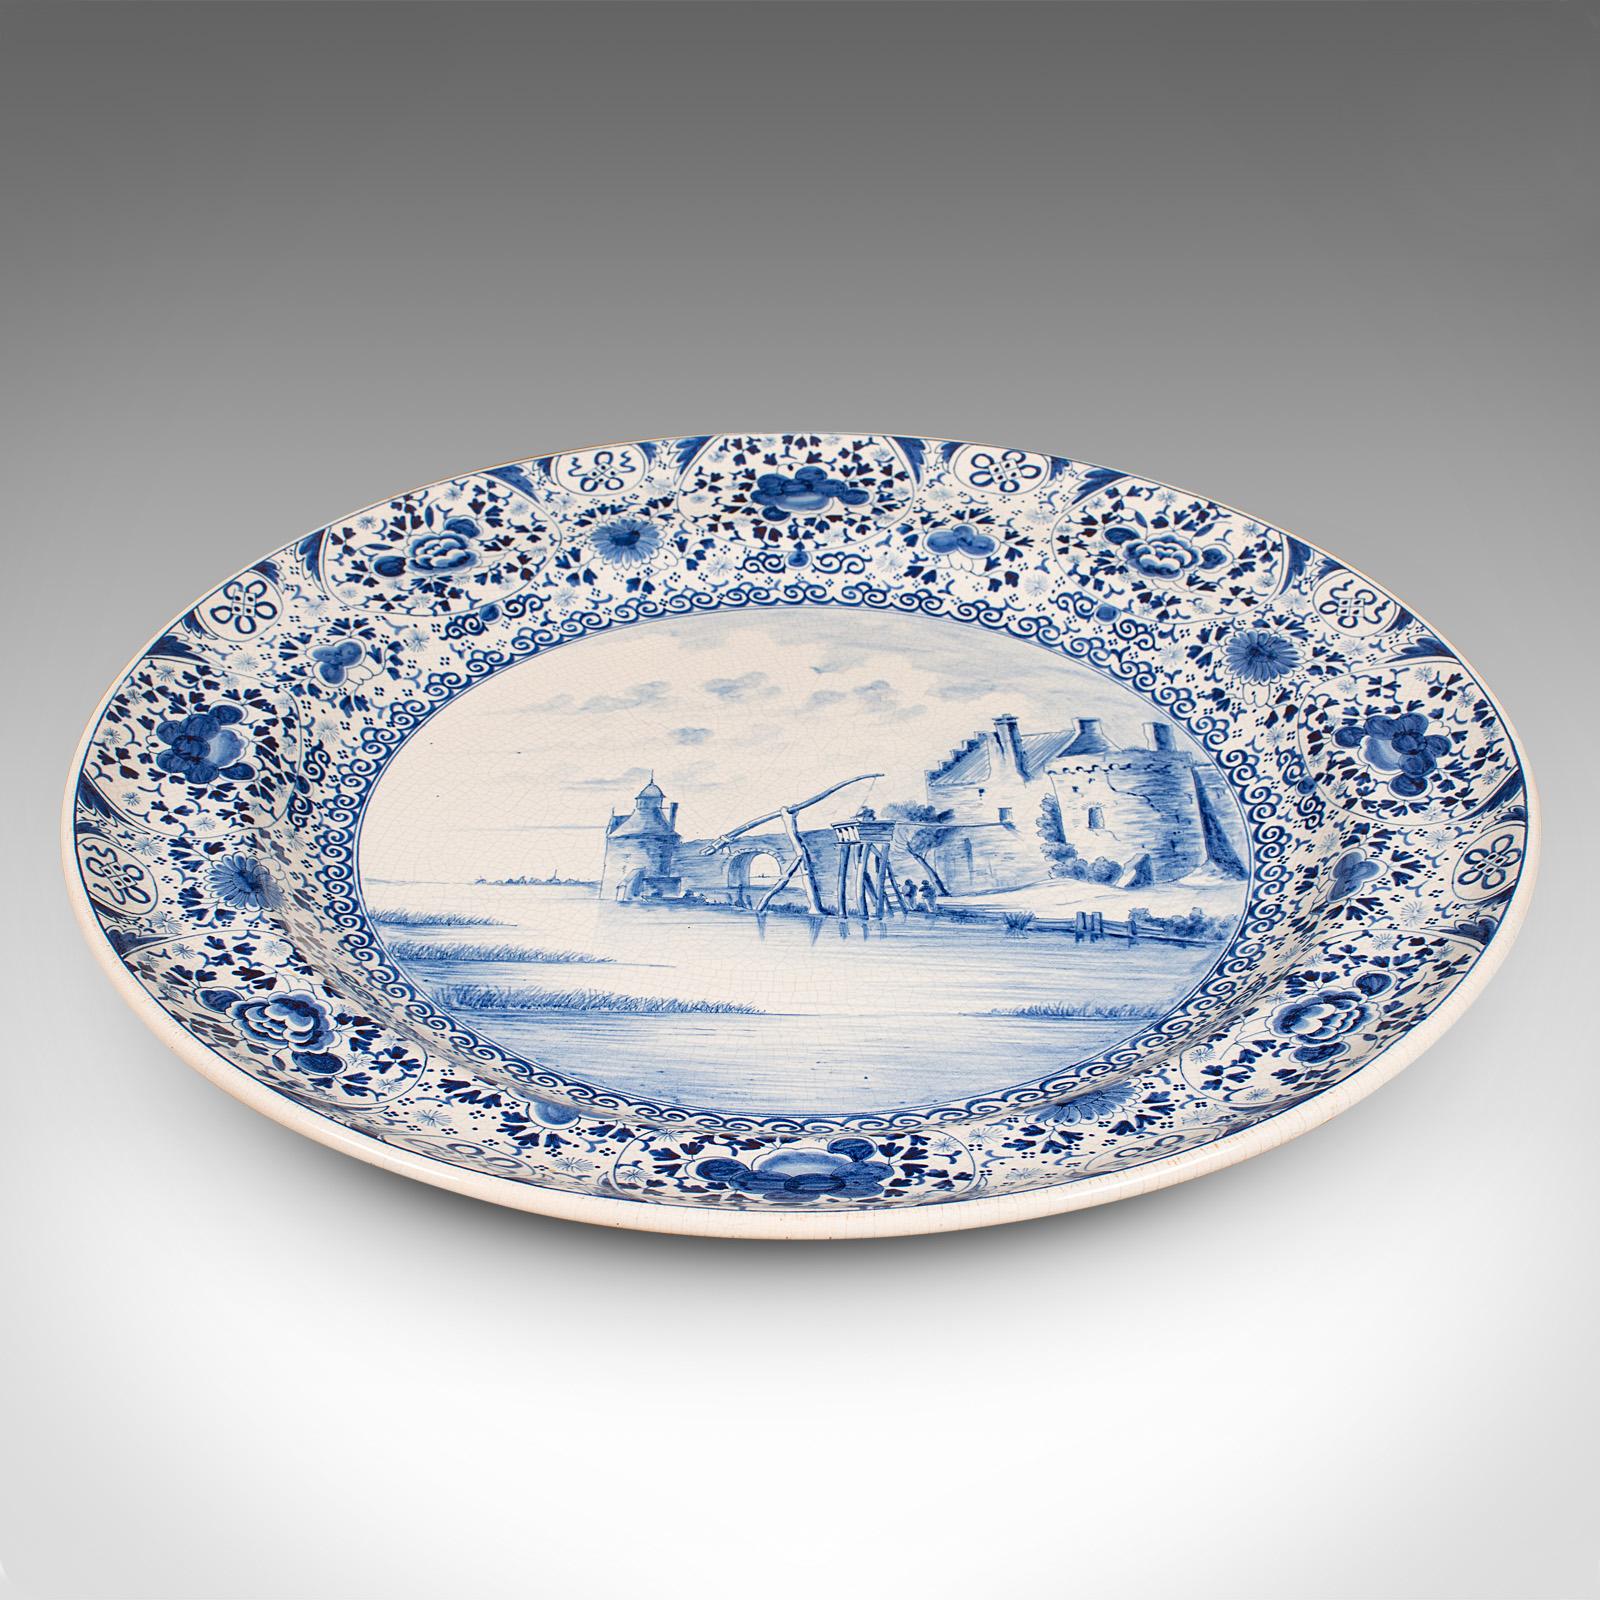 This is a large antique charger. A Belgian, ceramic serving plate with decorative finish, dating to the early 20th century, circa 1920.

Of generous proportion with a charming Delft blue & white taste
Displaying a desirable aged patina and in good